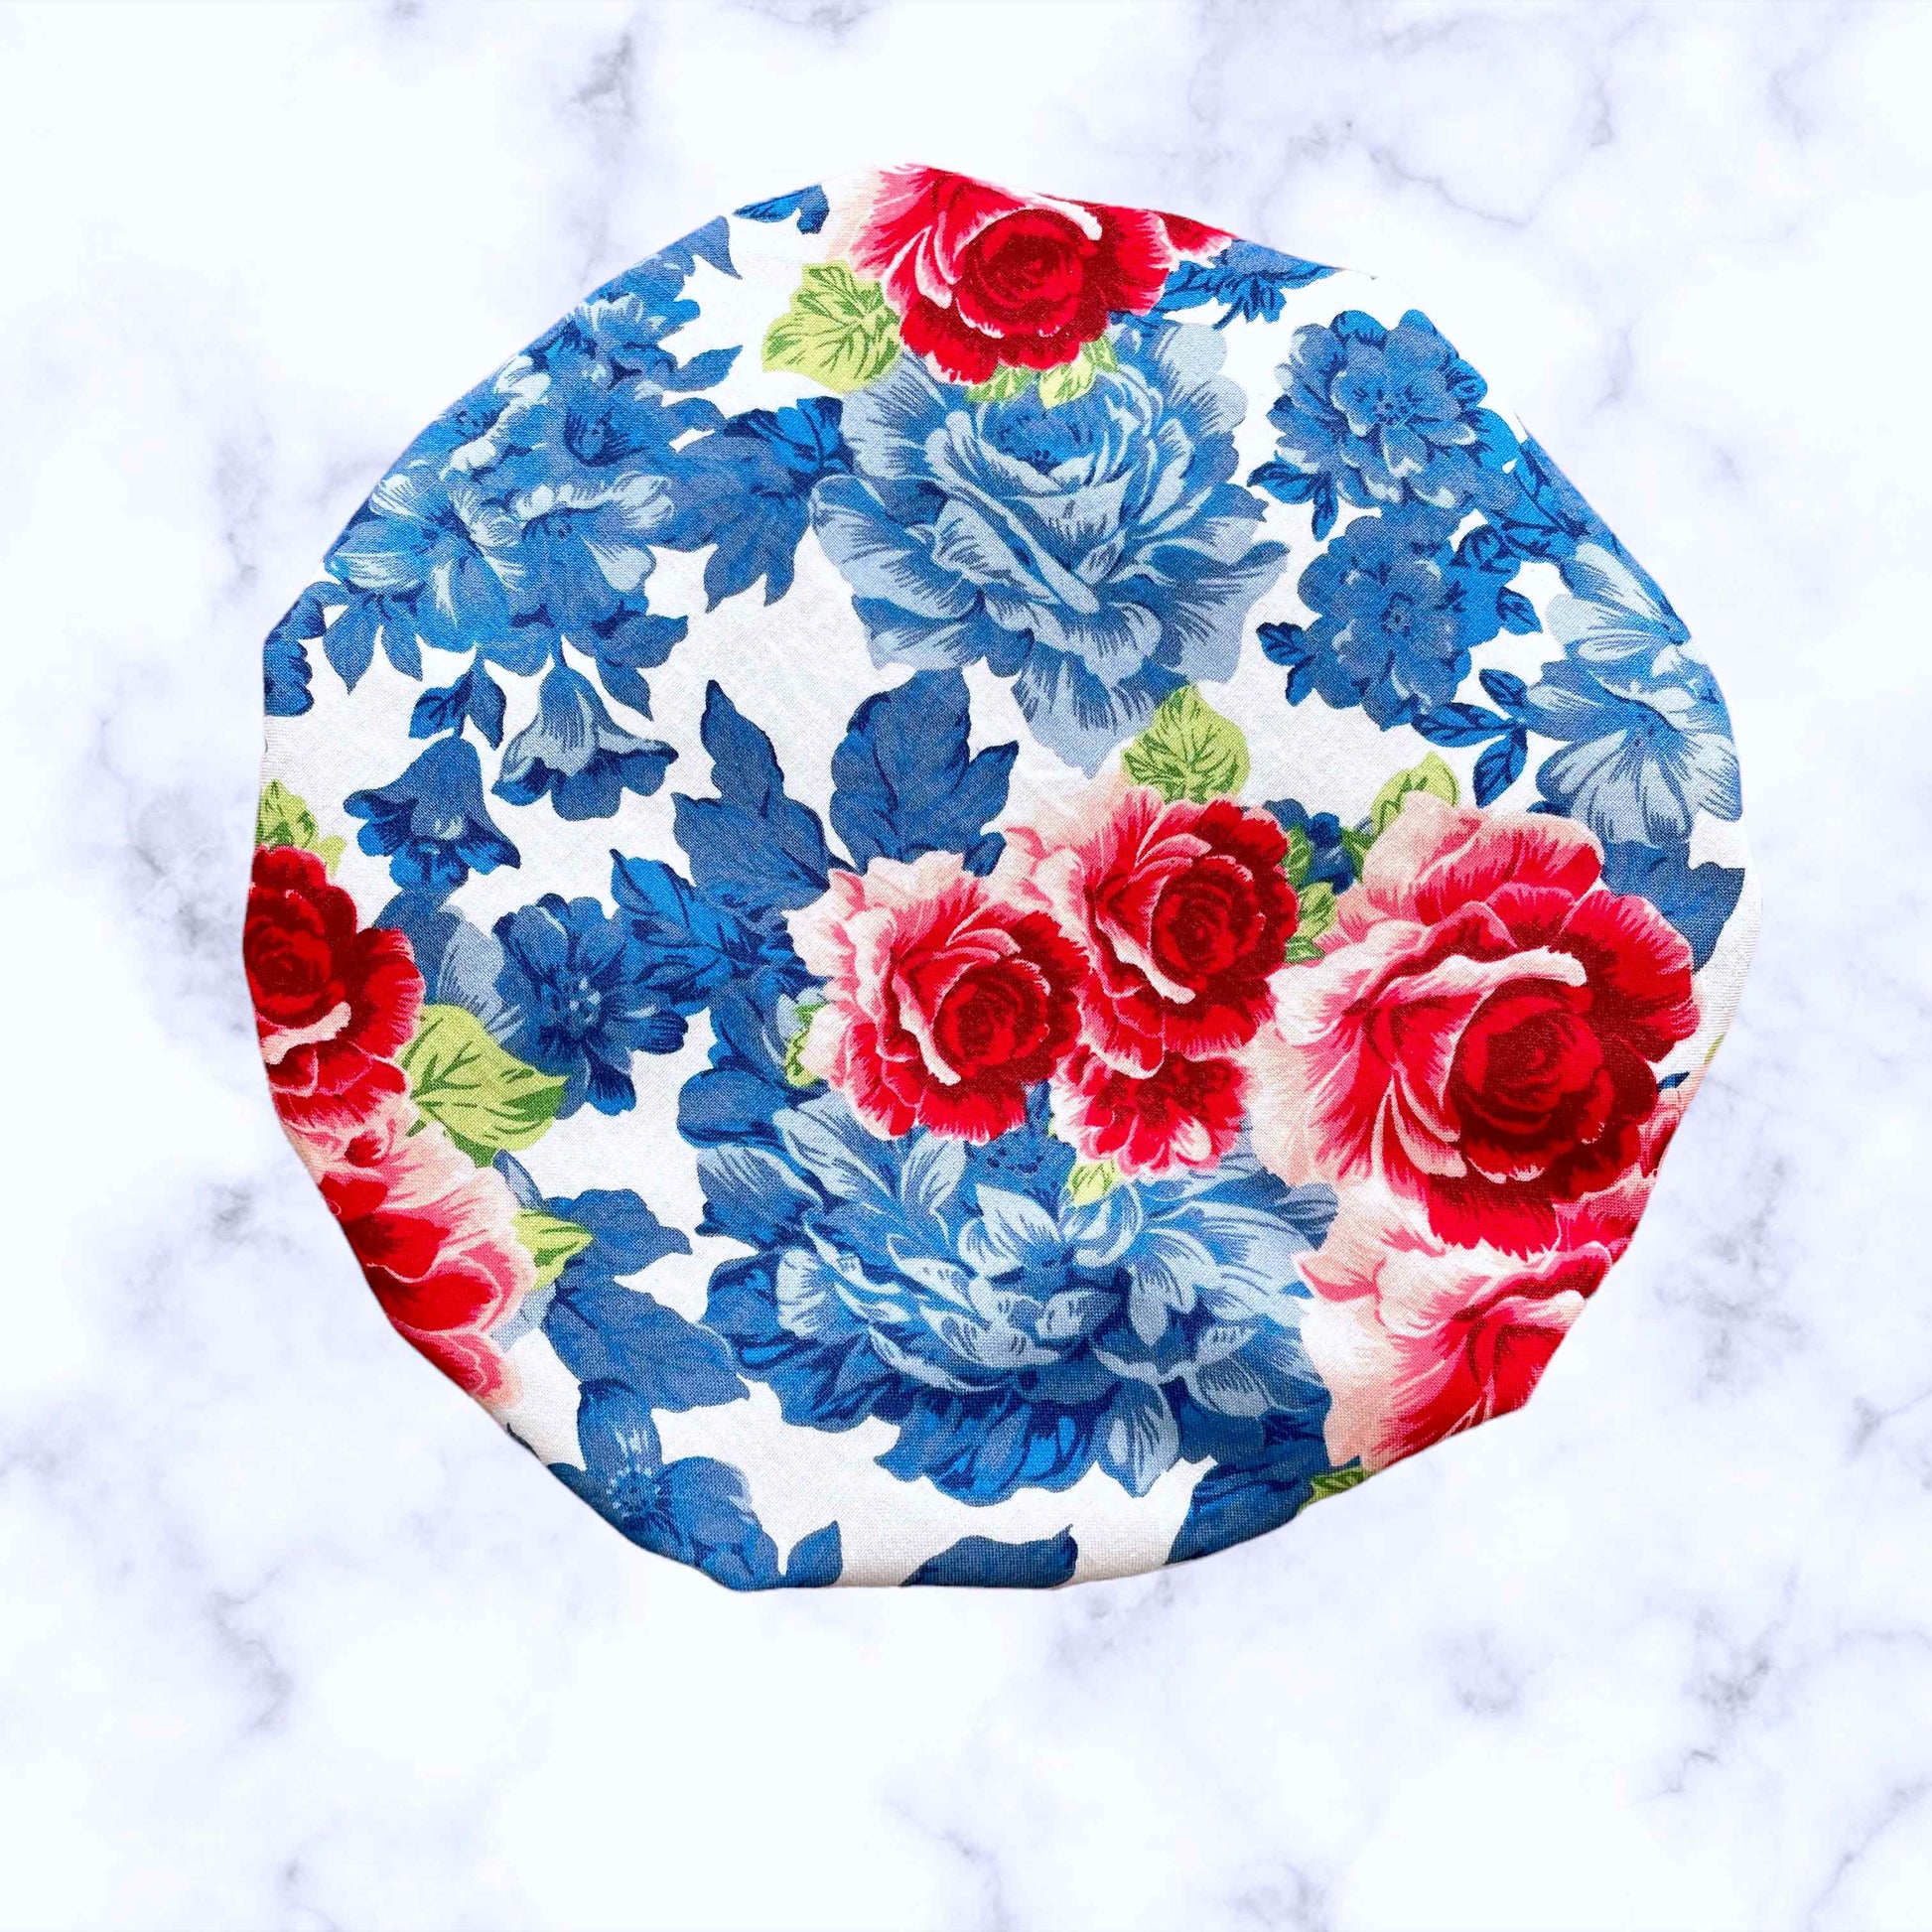 Pioneer Woman Blue Floral Mixer – Now Available!